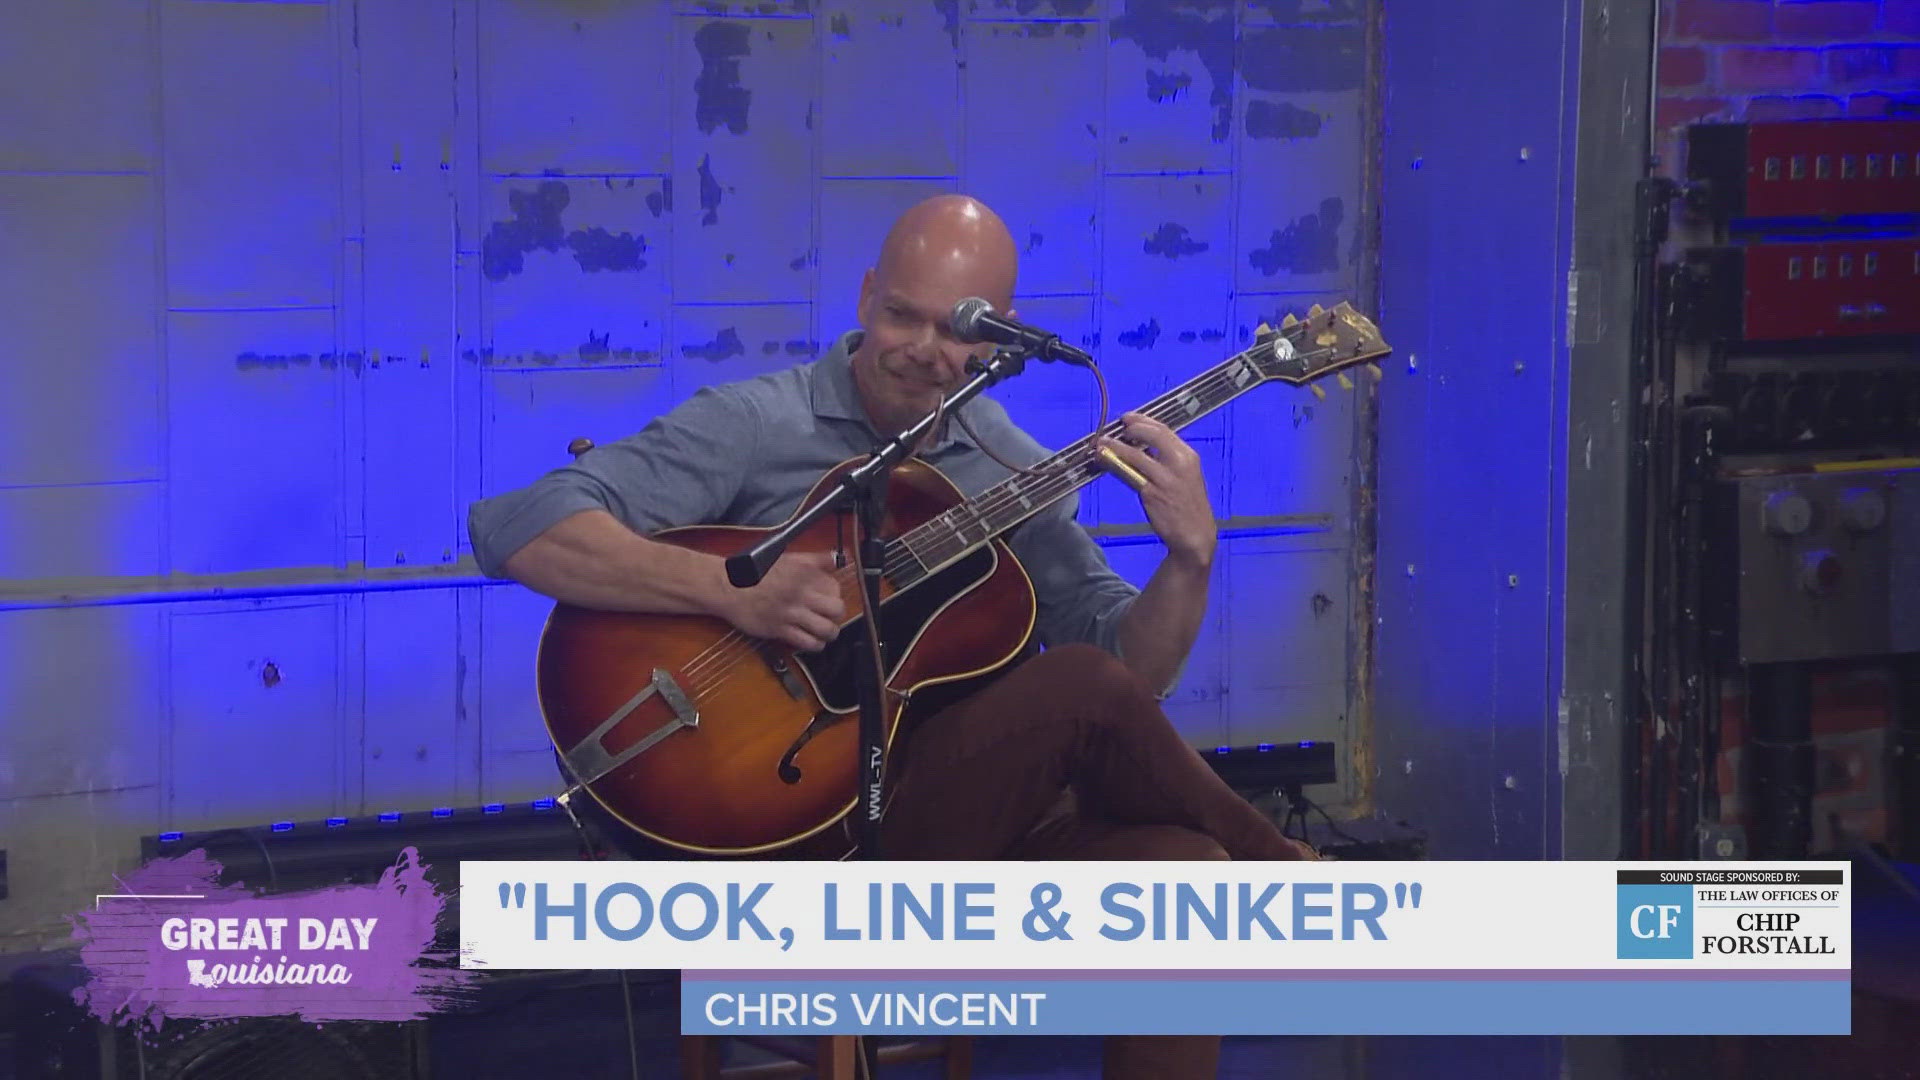 Local blues artist Chris Vincent shares music from his latest album in our Chip Forstall Sound Stage.